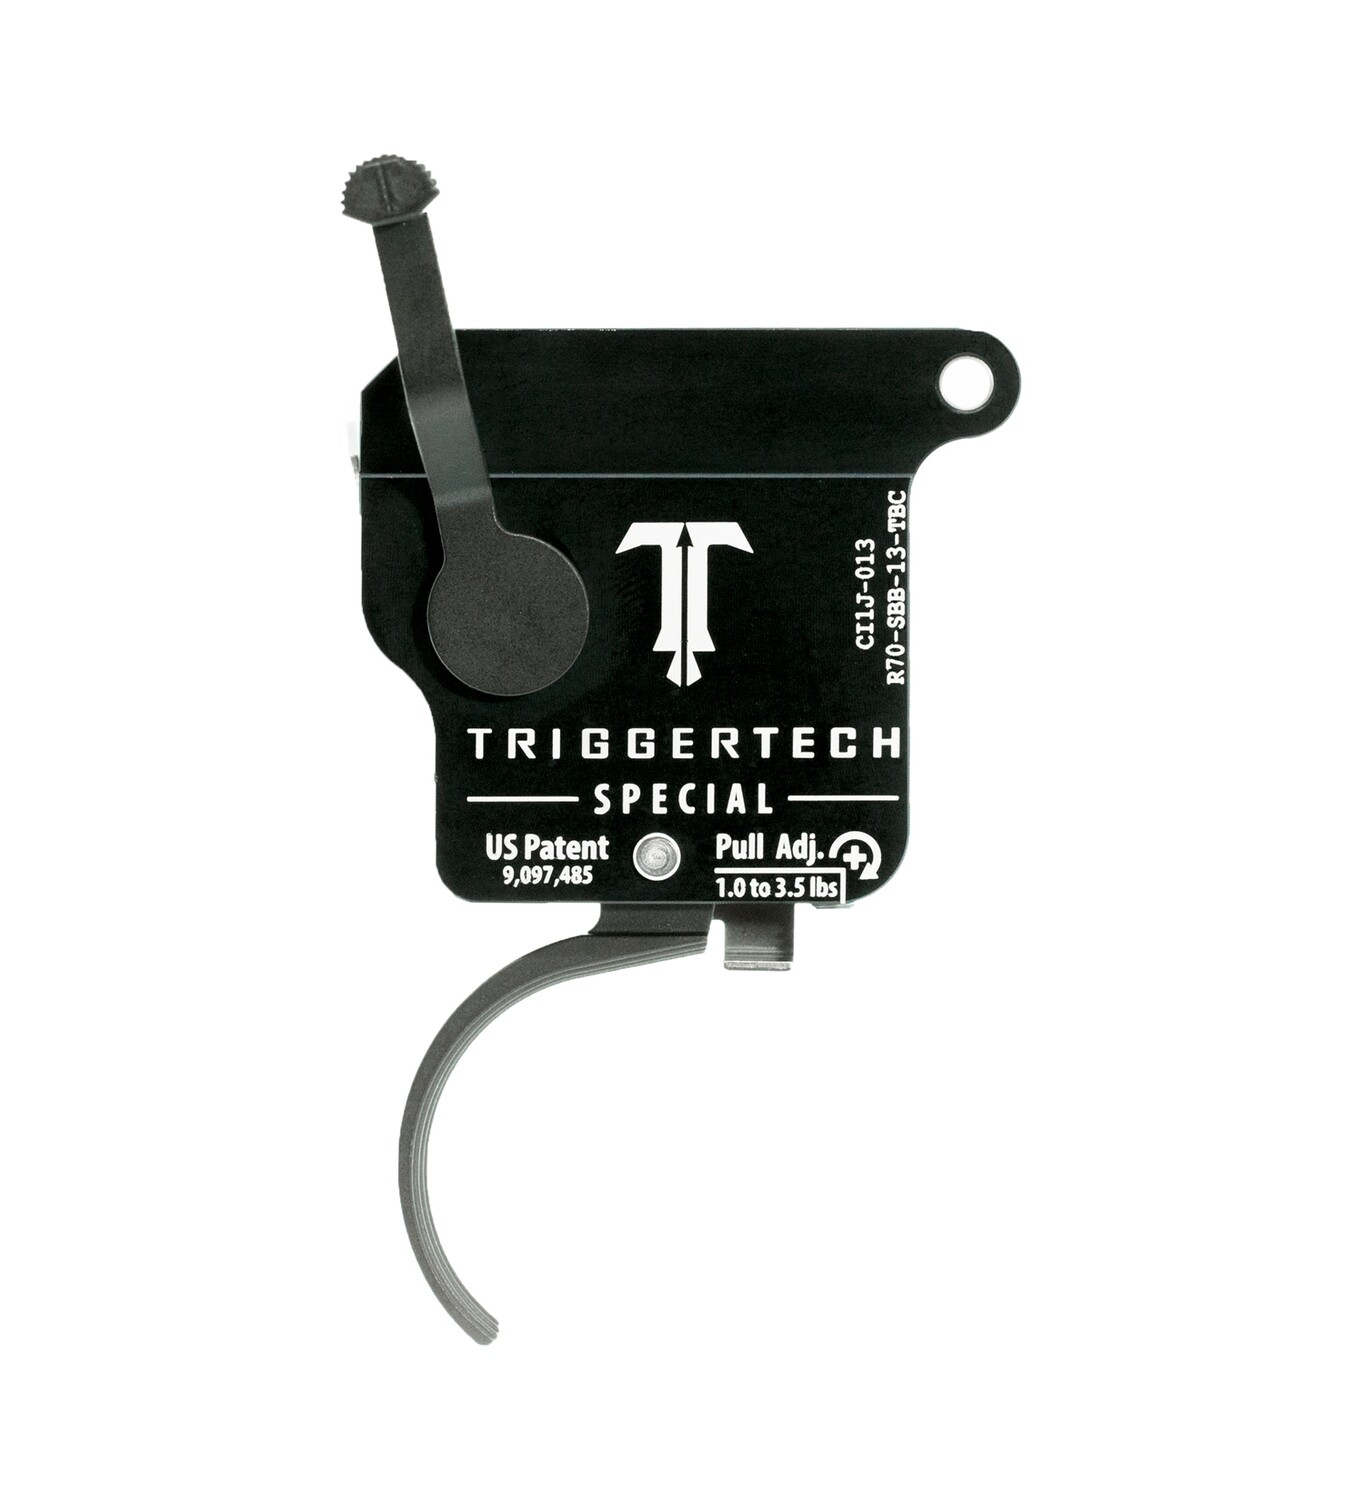 TriggerTech Special Curved PVD Trigger for Remington 700